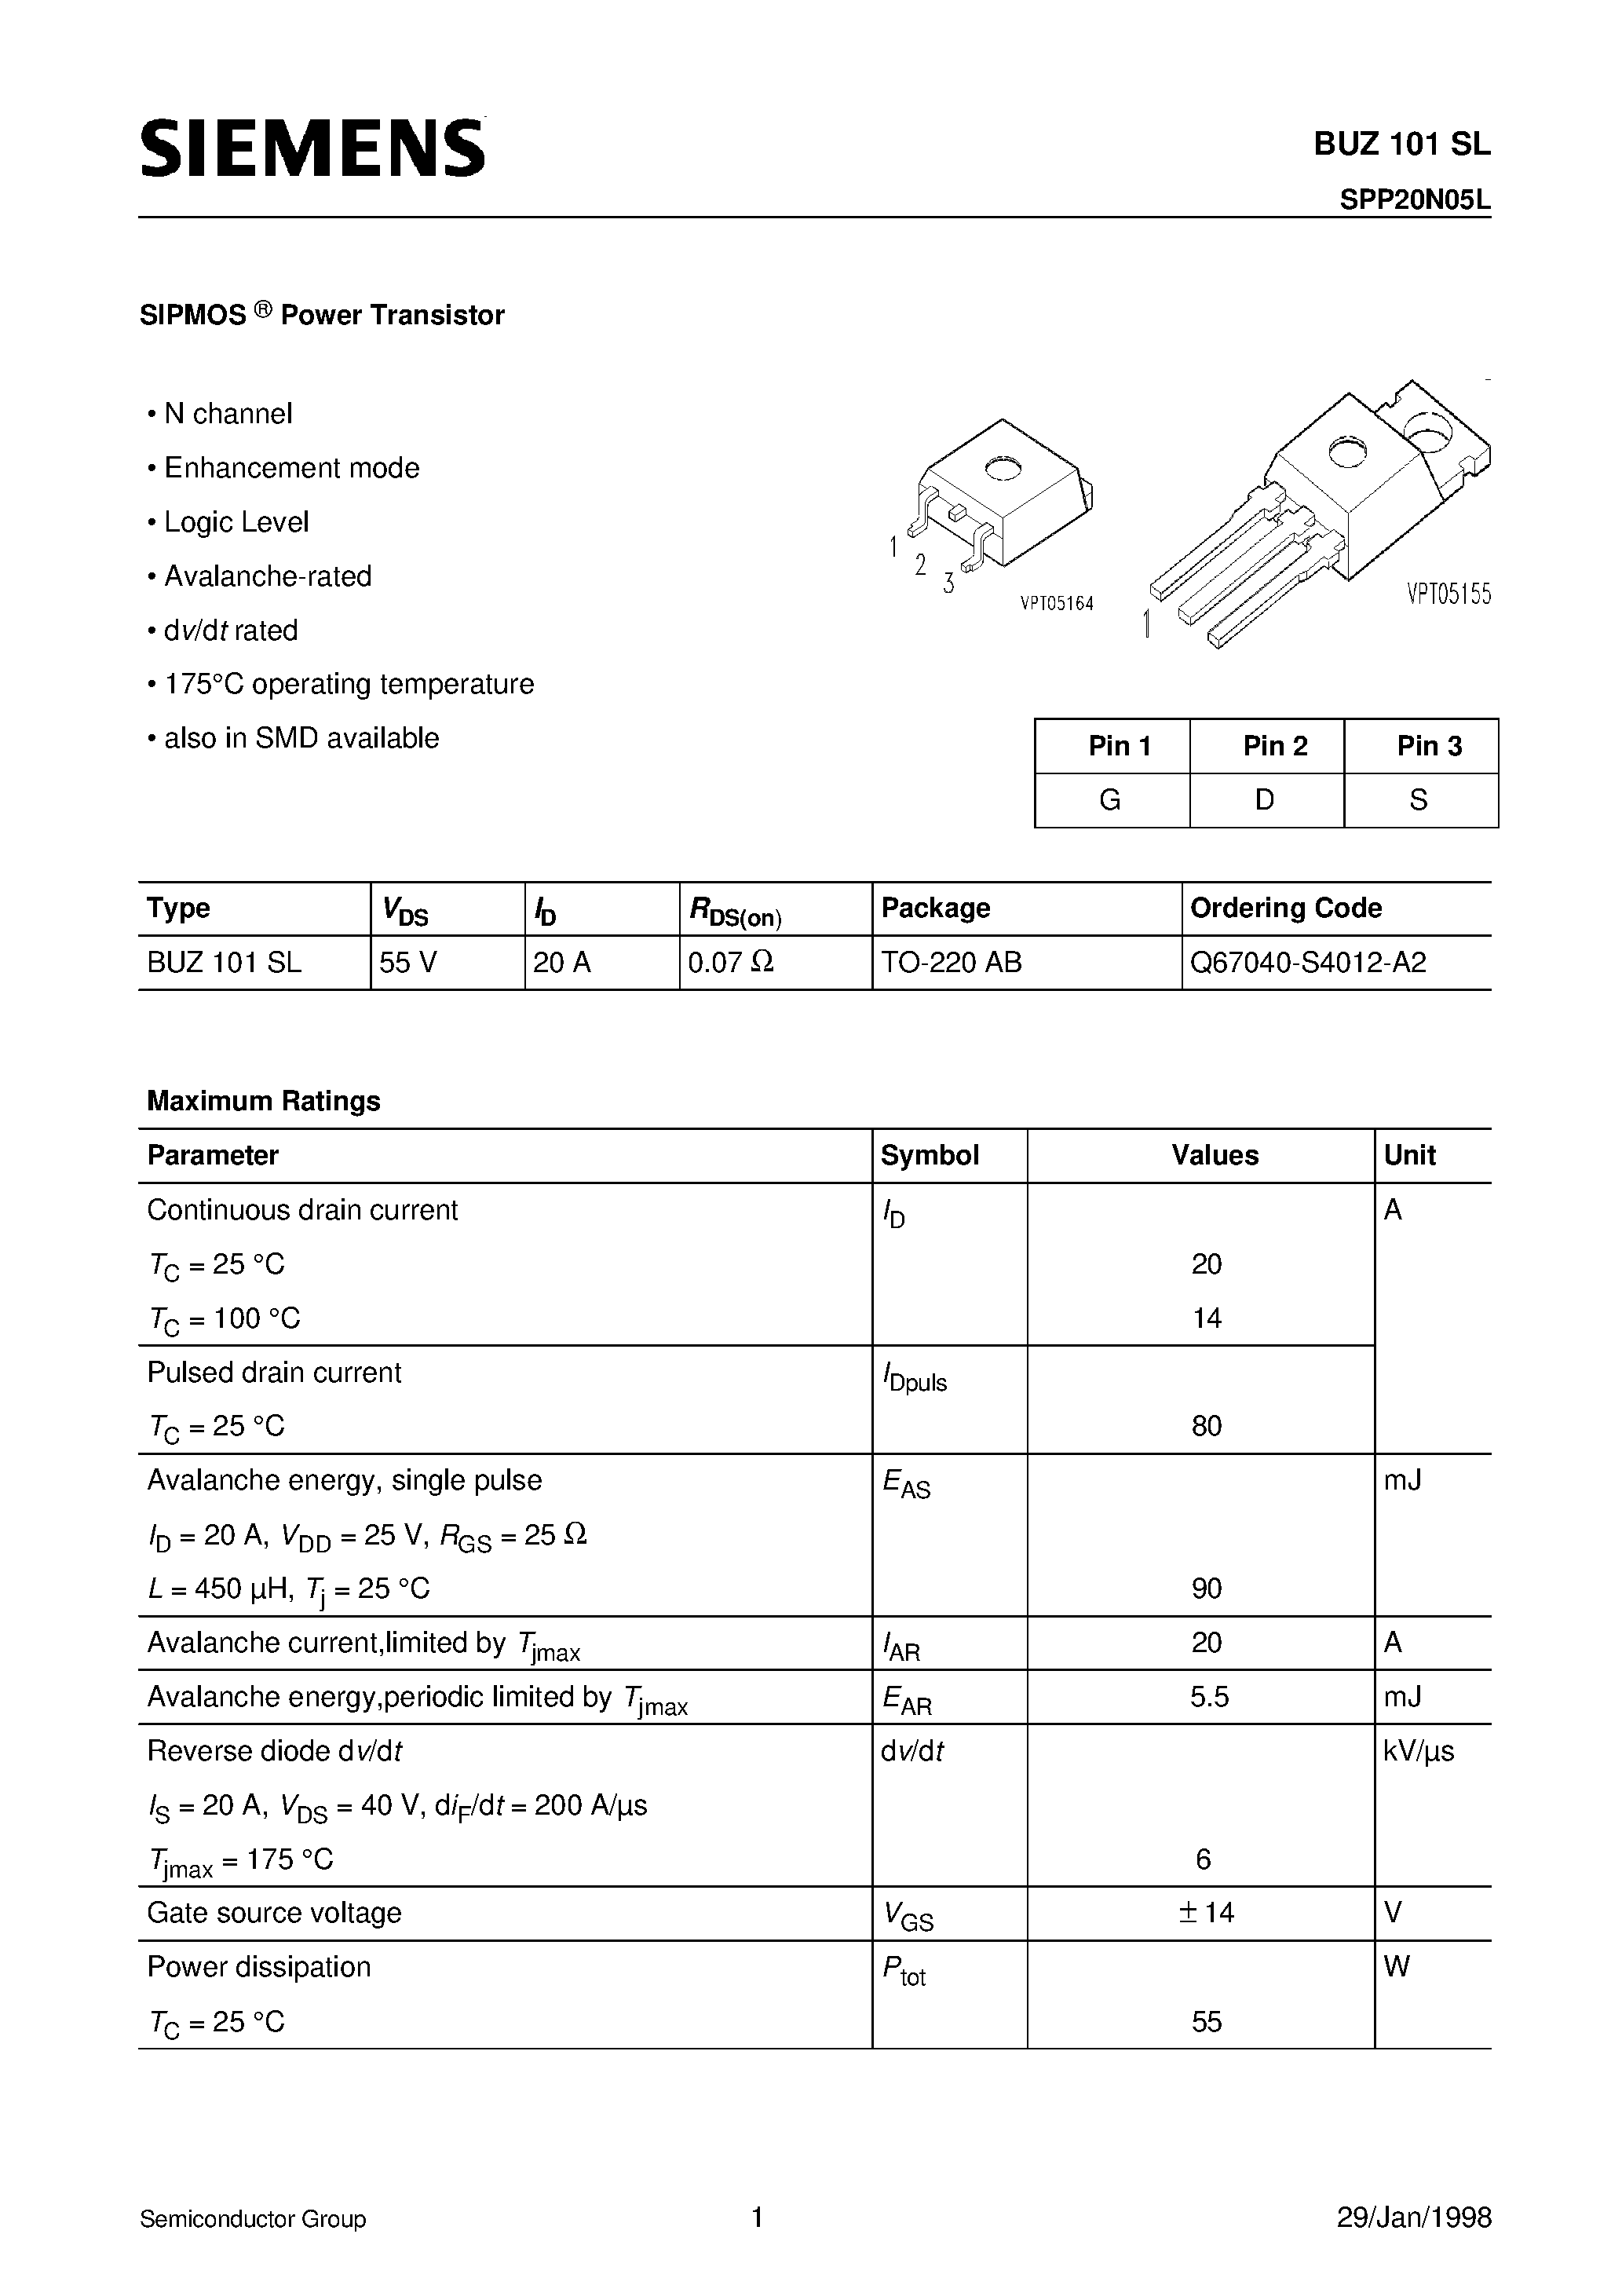 Datasheet BUZ101SLE3045A - SIPMOS Power Transistor (N channel Enhancement mode Logic Level Avalanche-rated) page 1